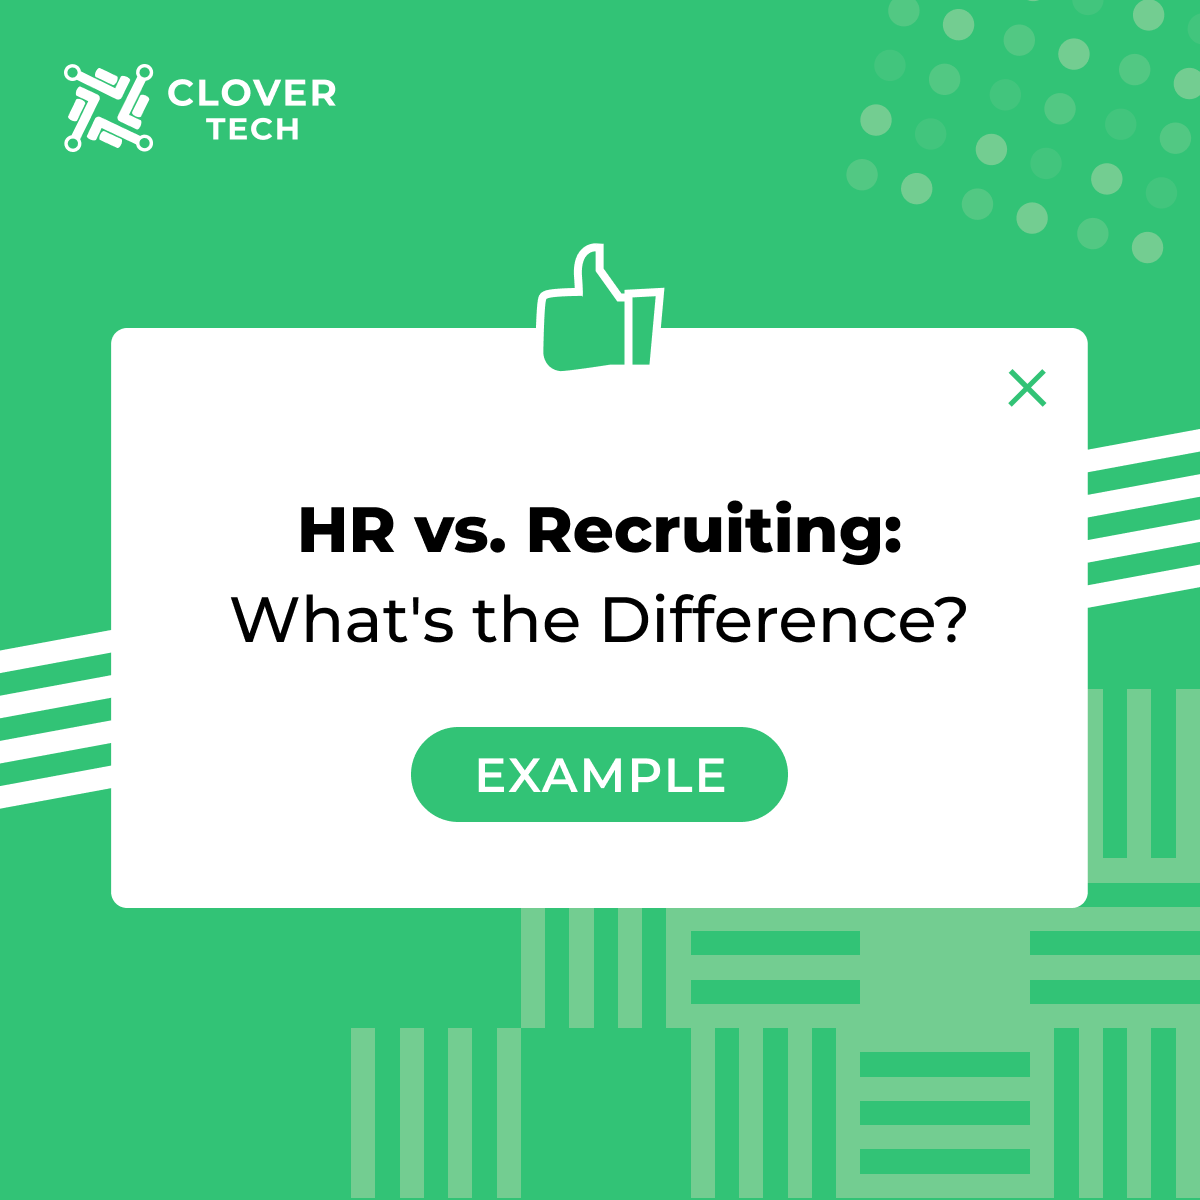 Human Resources vs. Recruiting: What's the Difference?